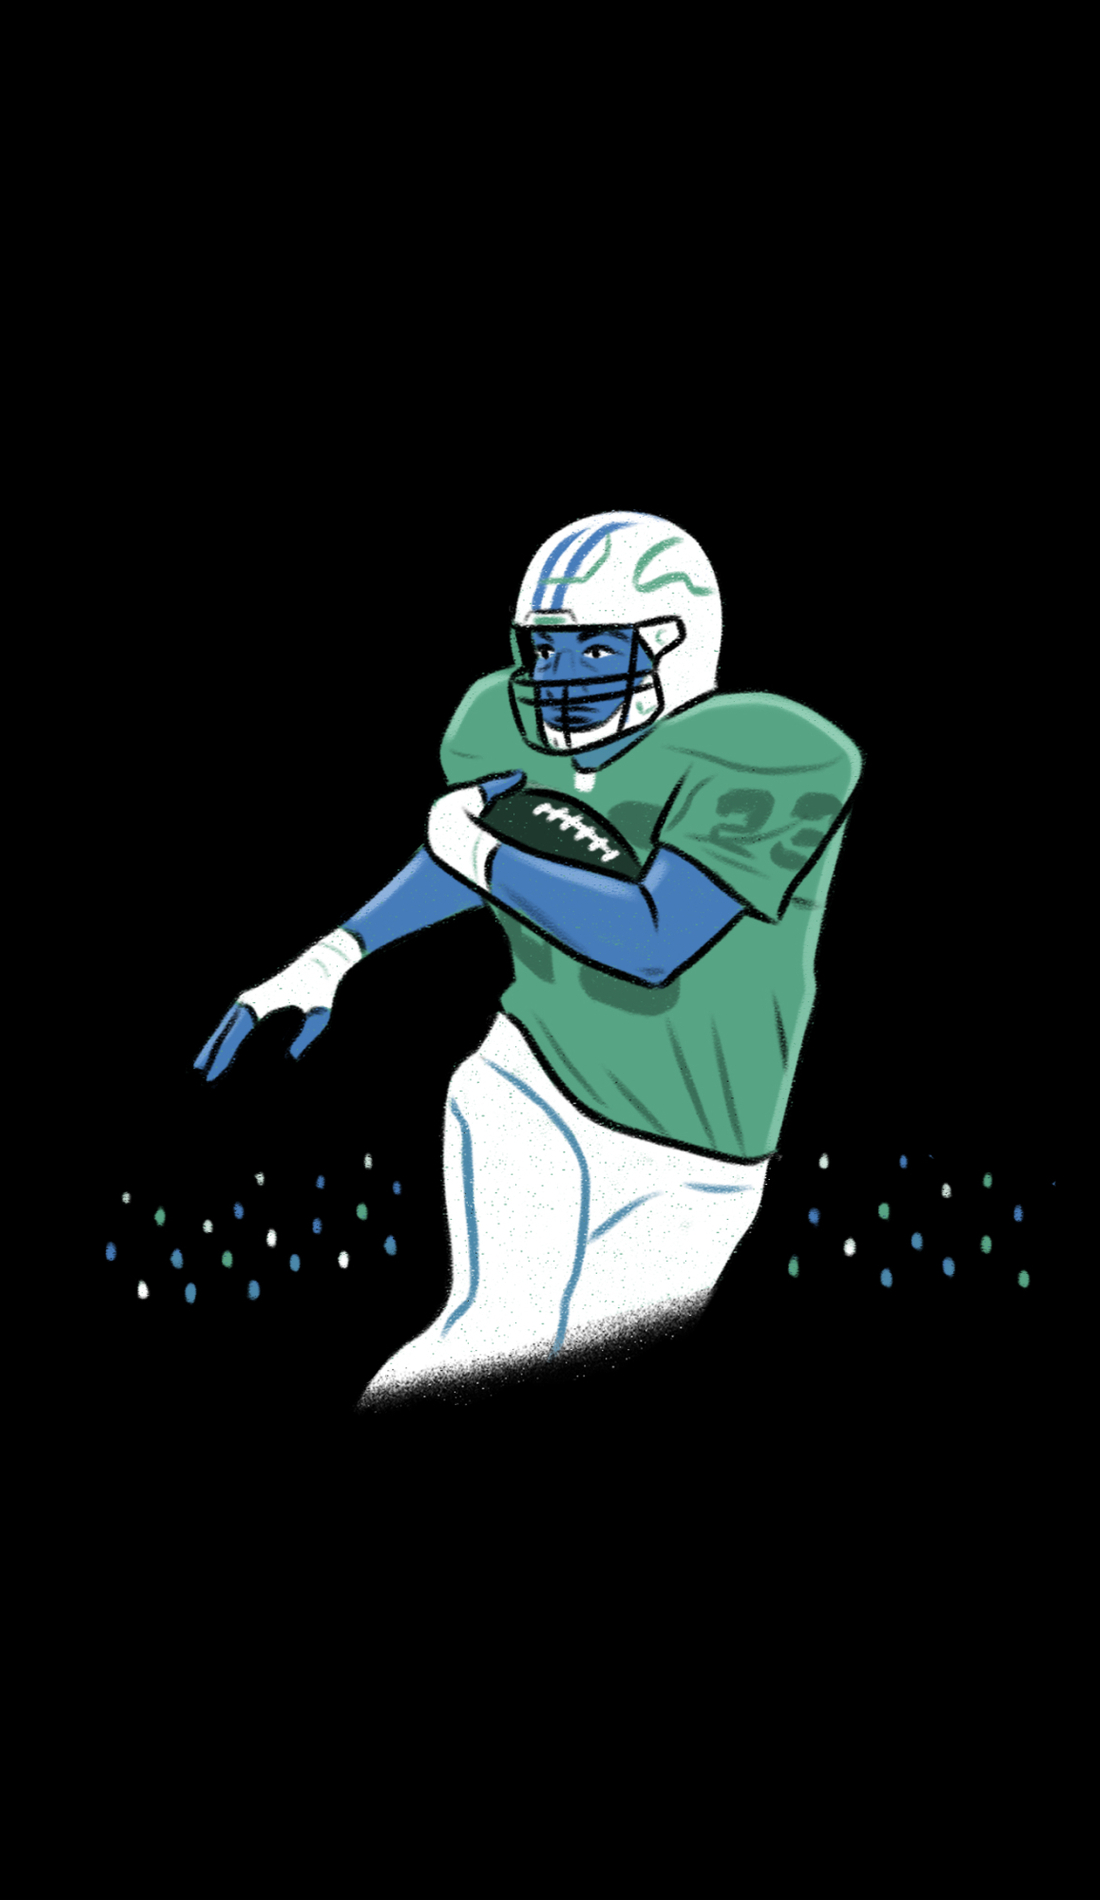 A Central Connecticut State Blue Devils Football live event